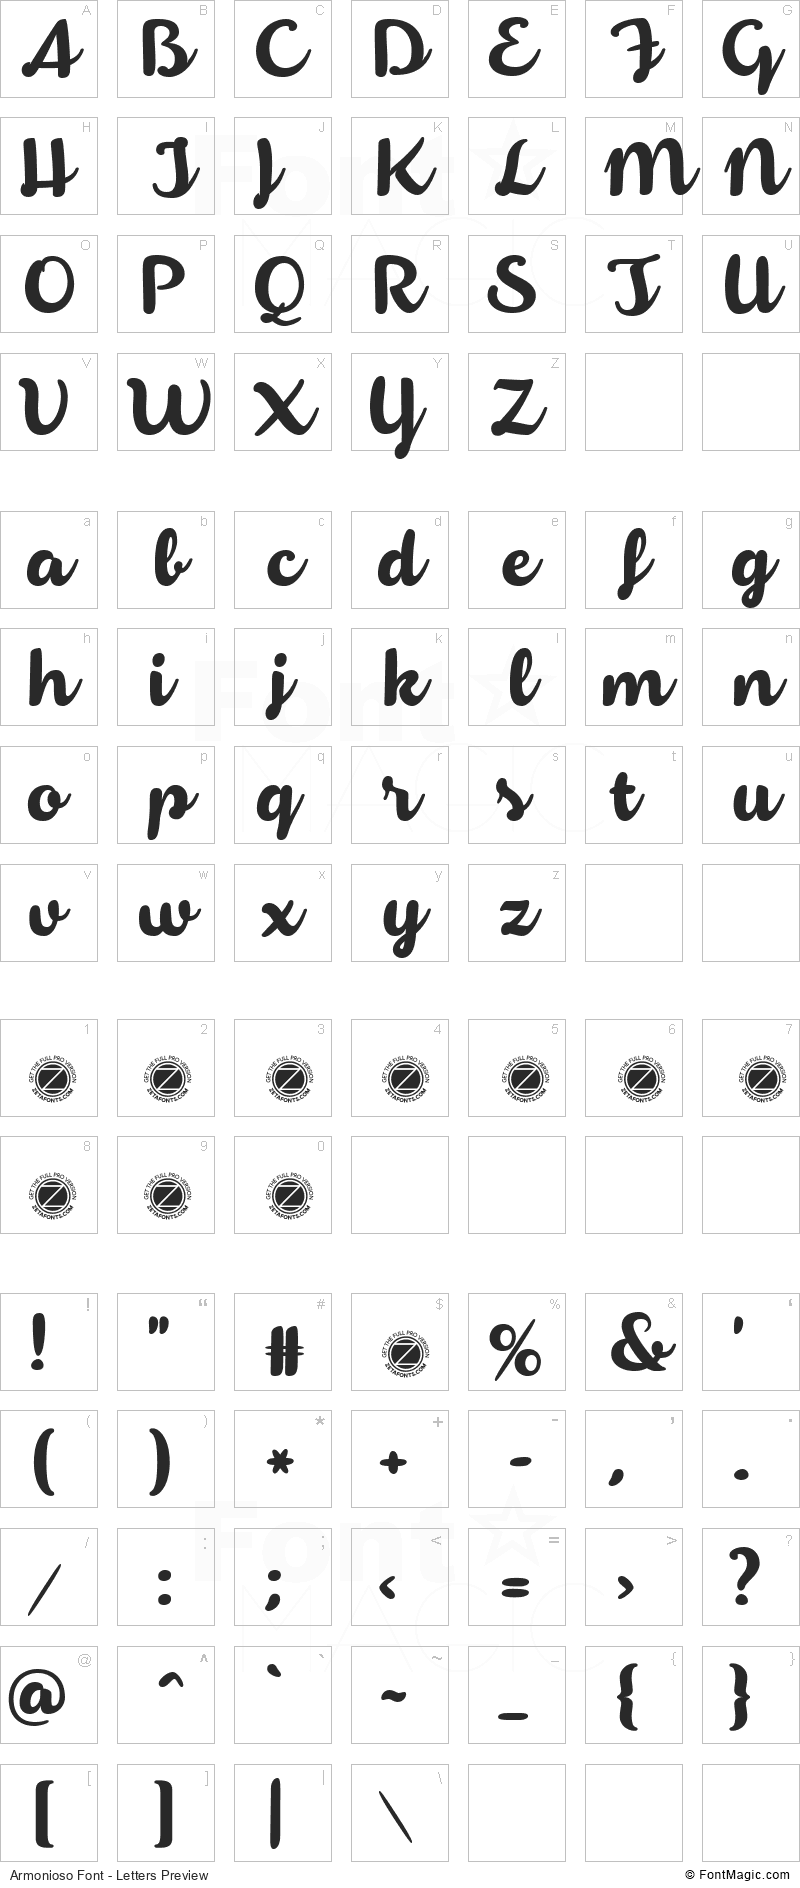 Armonioso Font - All Latters Preview Chart